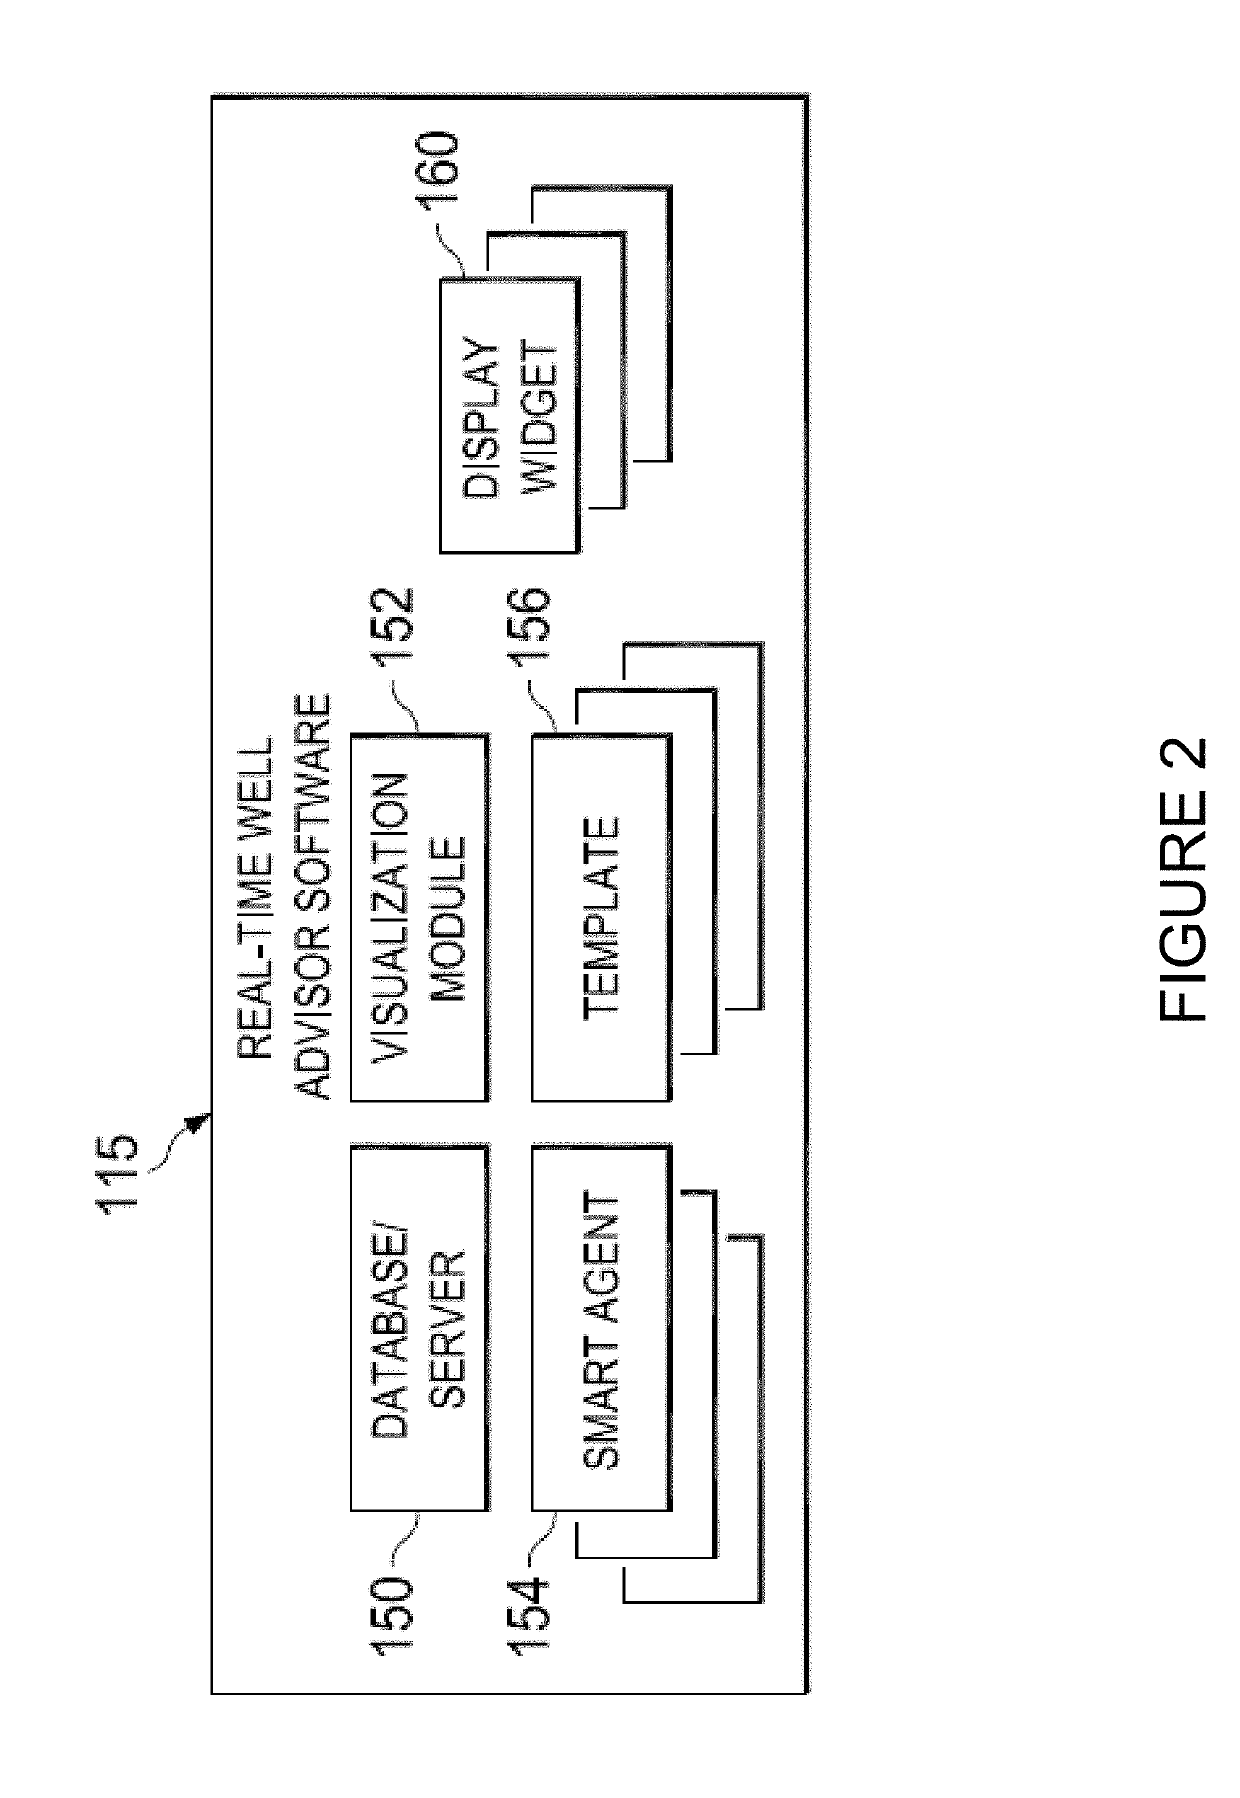 System and console for monitoring and managing pressure testing operations at a well site